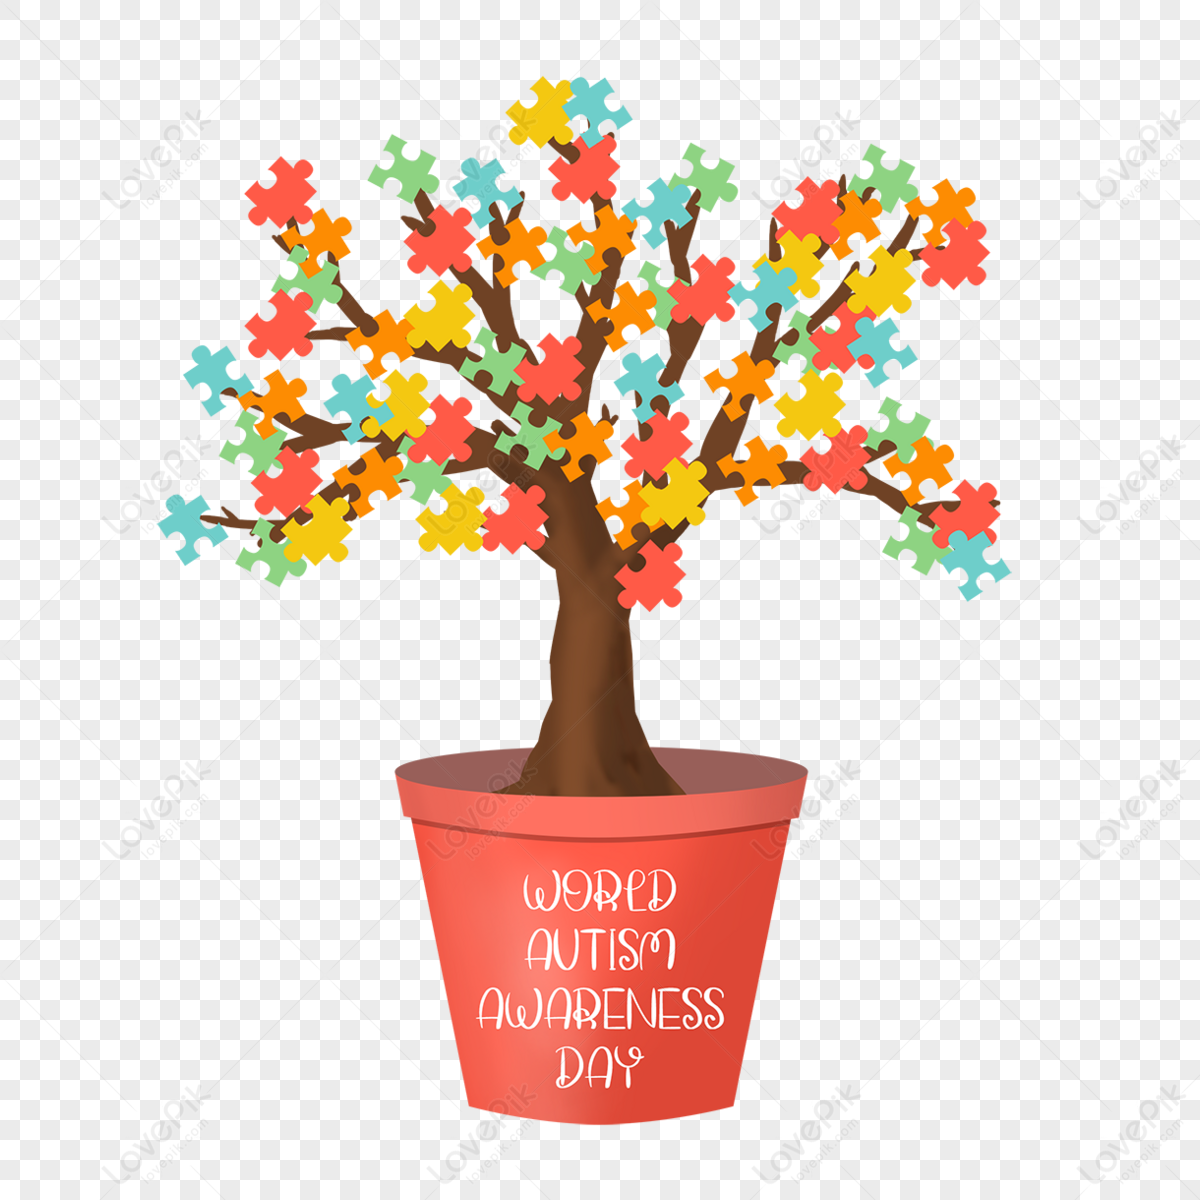 World Tree png download - 547*480 - Free Transparent Haiti png Download. -  CleanPNG / KissPNG